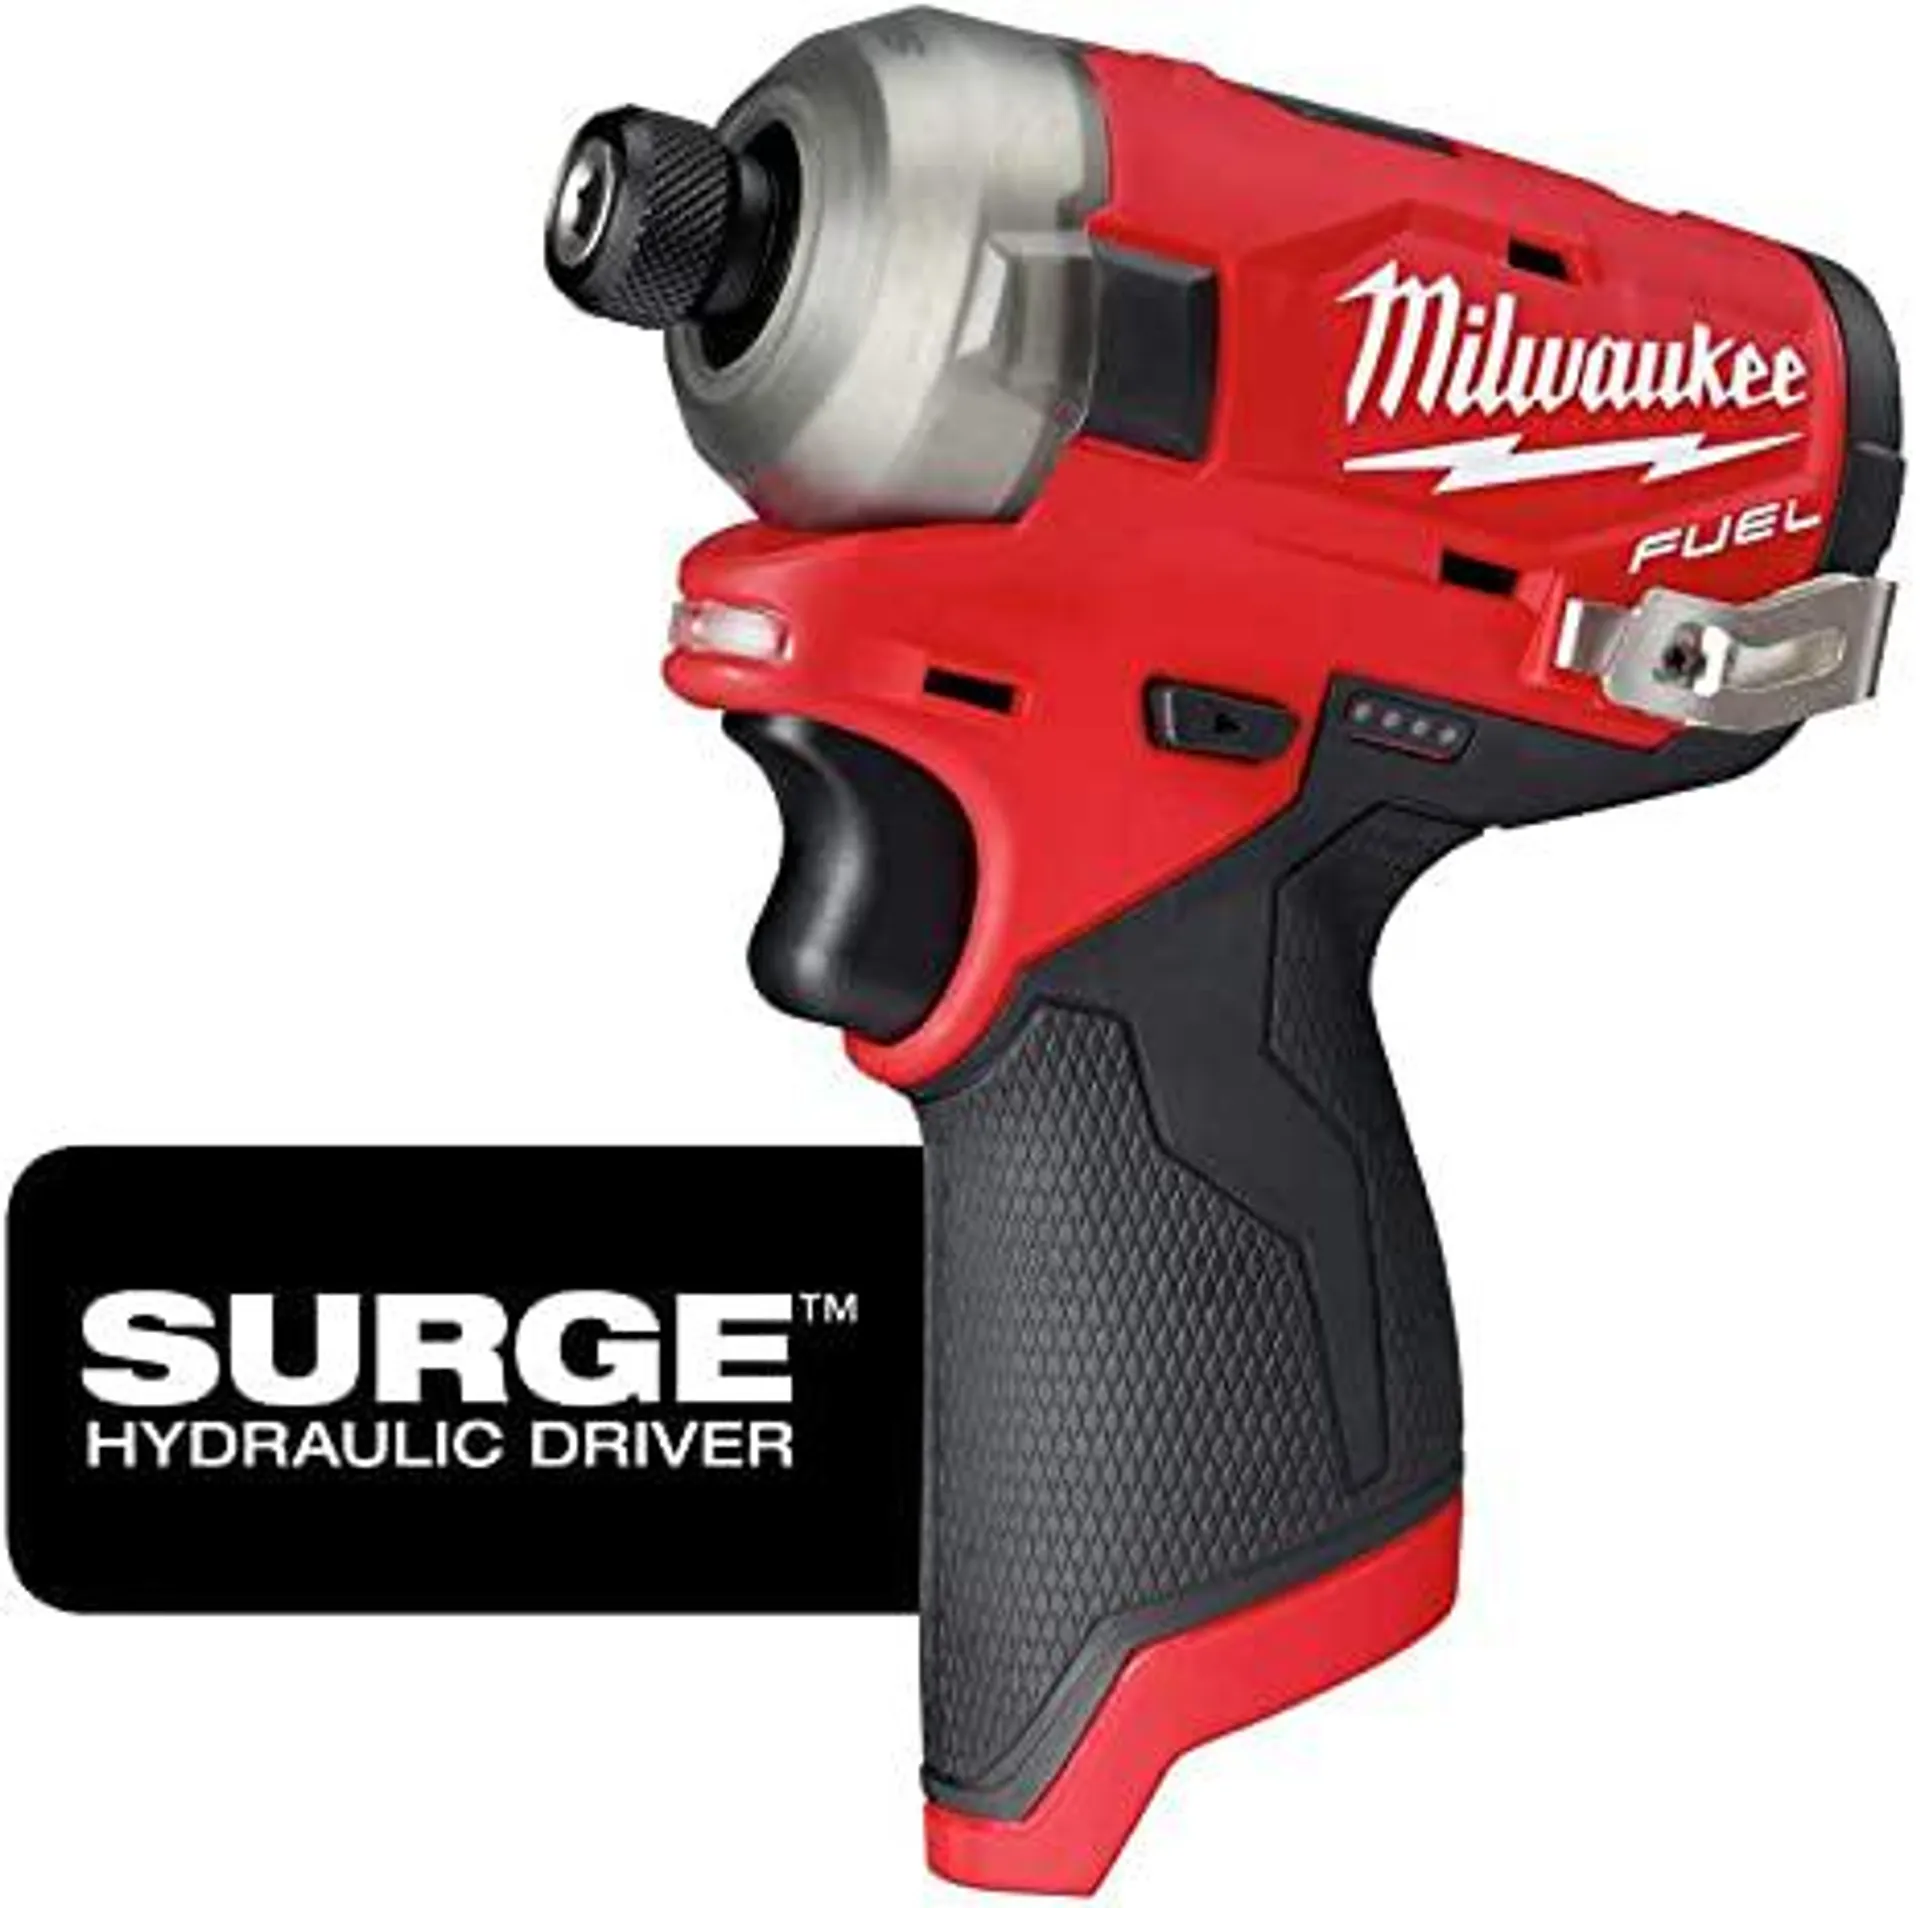 Milwaukee 2551-20 M12 FUEL SURGE Compact Lithium-Ion 1/4 in. Cordless Hex Hydraulic Driver (Tool Only)